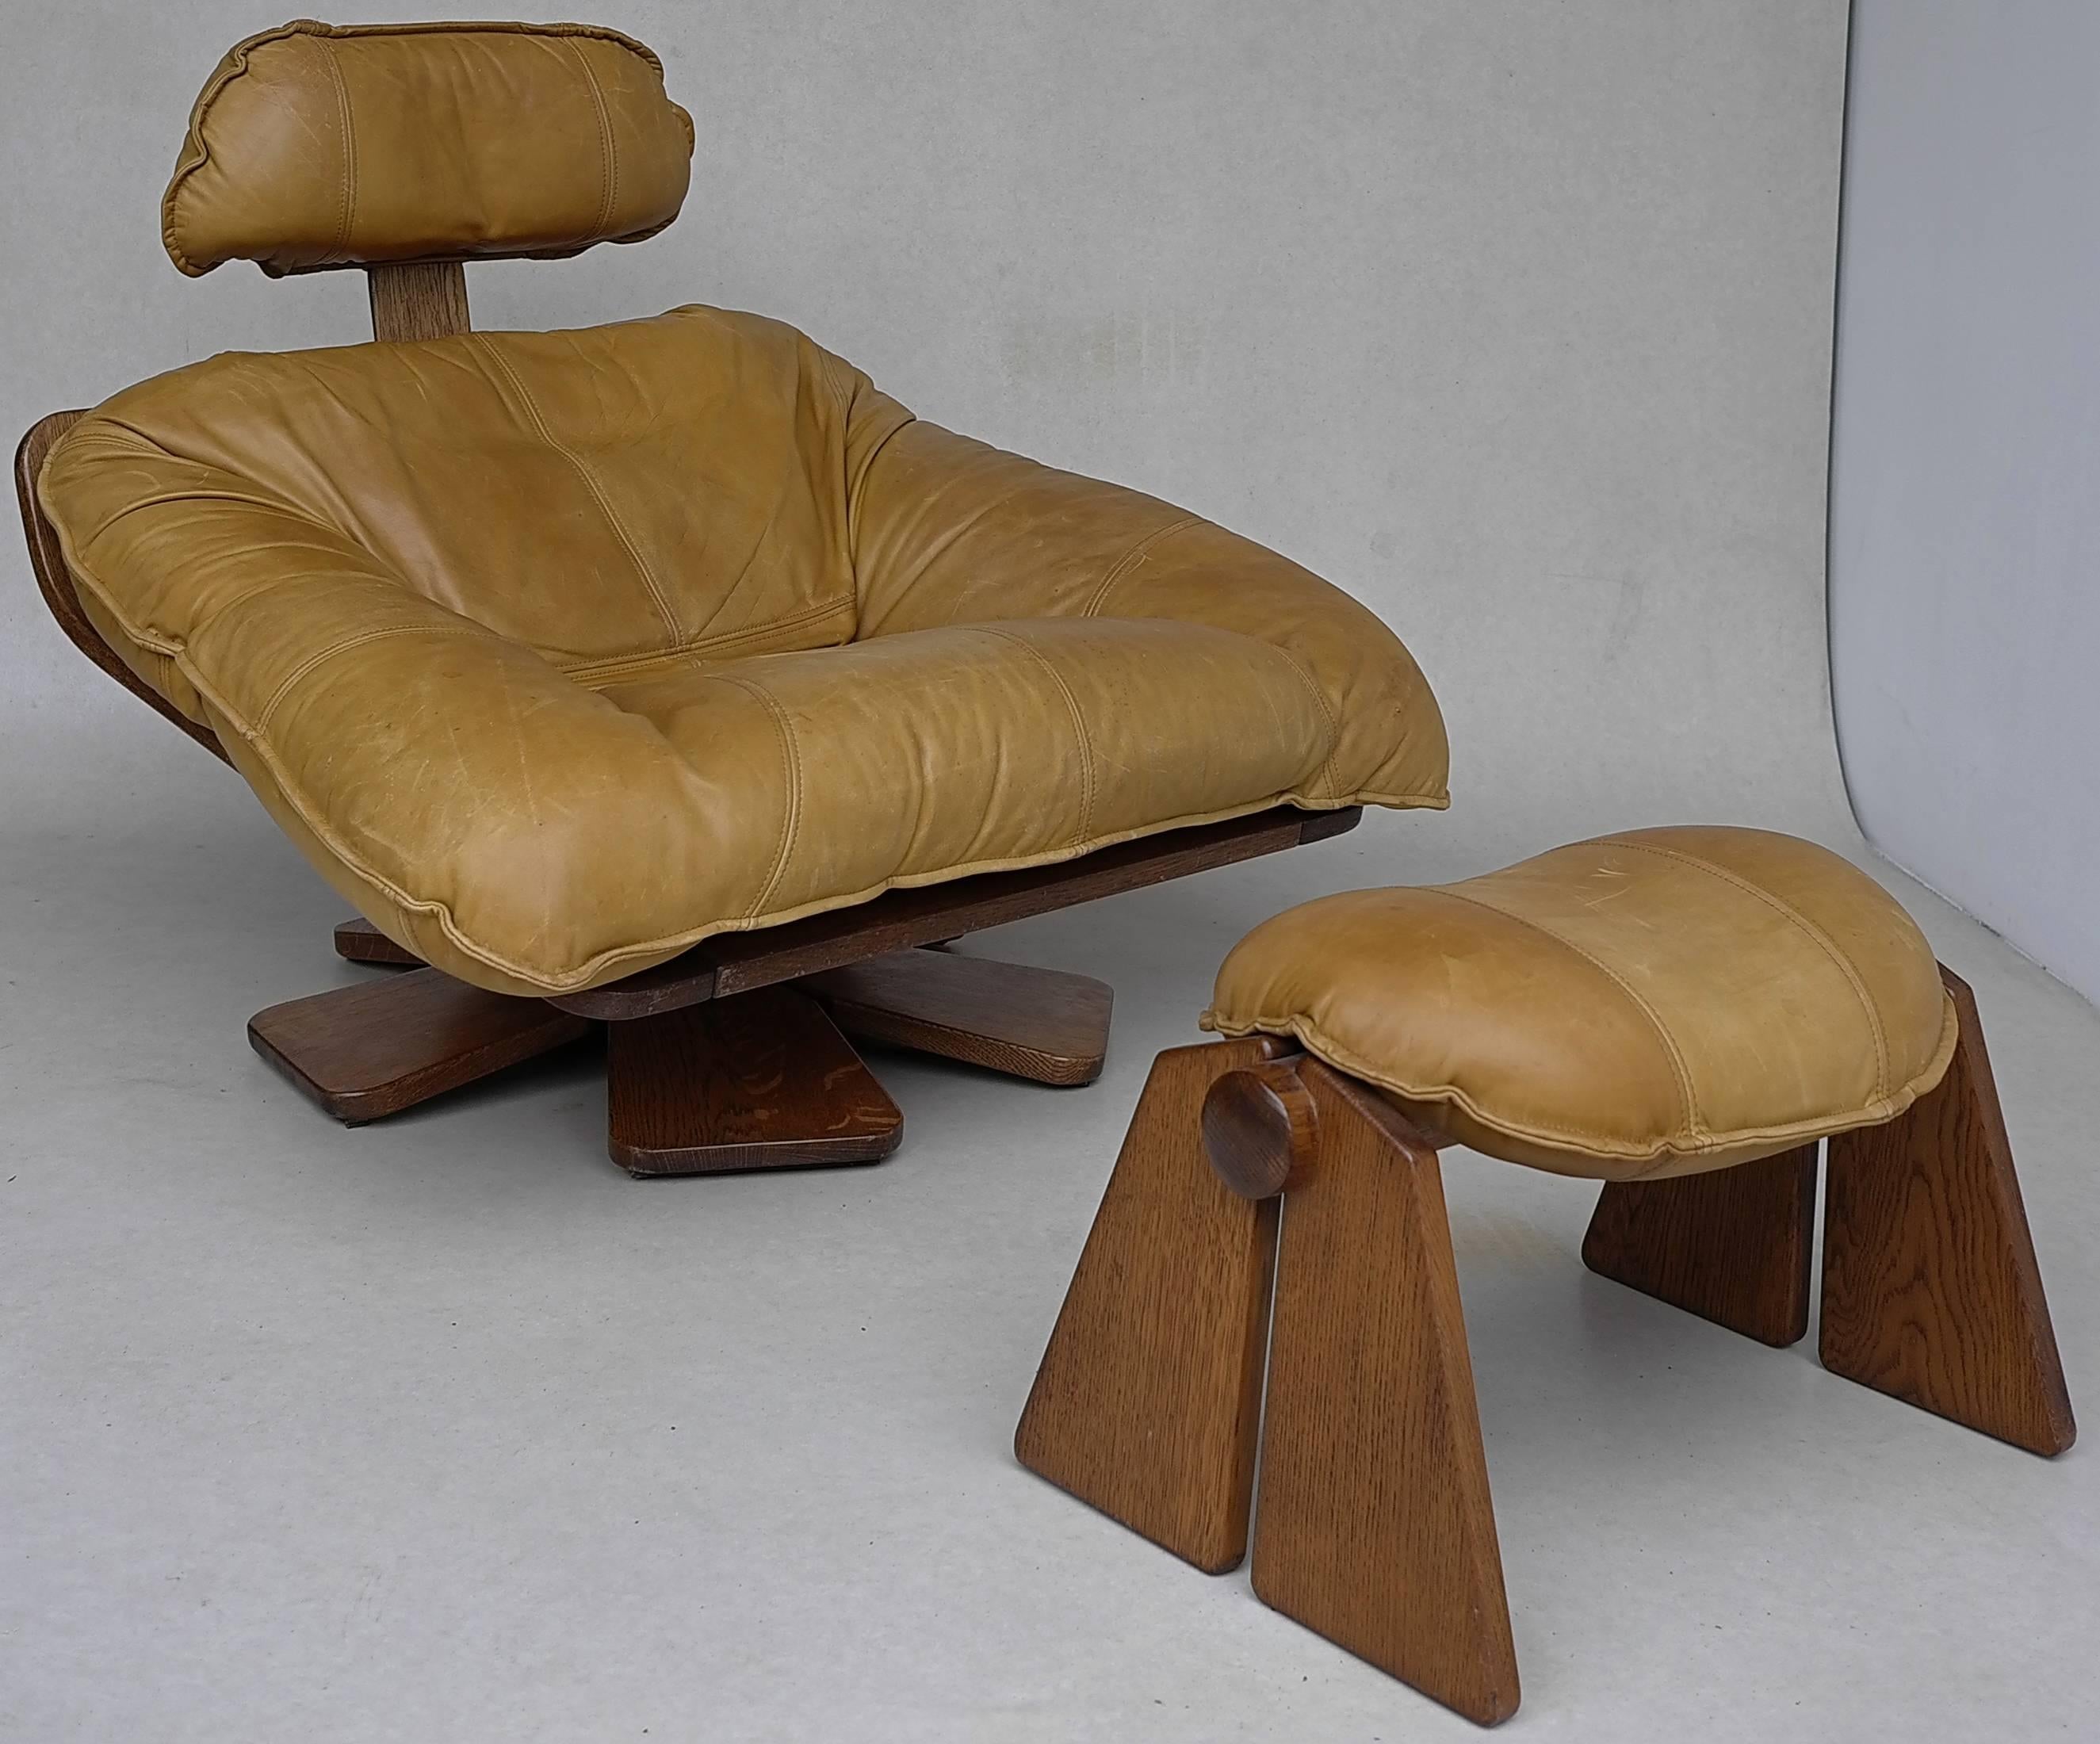 Cognac leather lounge chair with ottoman, Brazil, 1960s.
The lounge chair is rotatable and made from a high quality cognac leather.
The base is in solid wood.